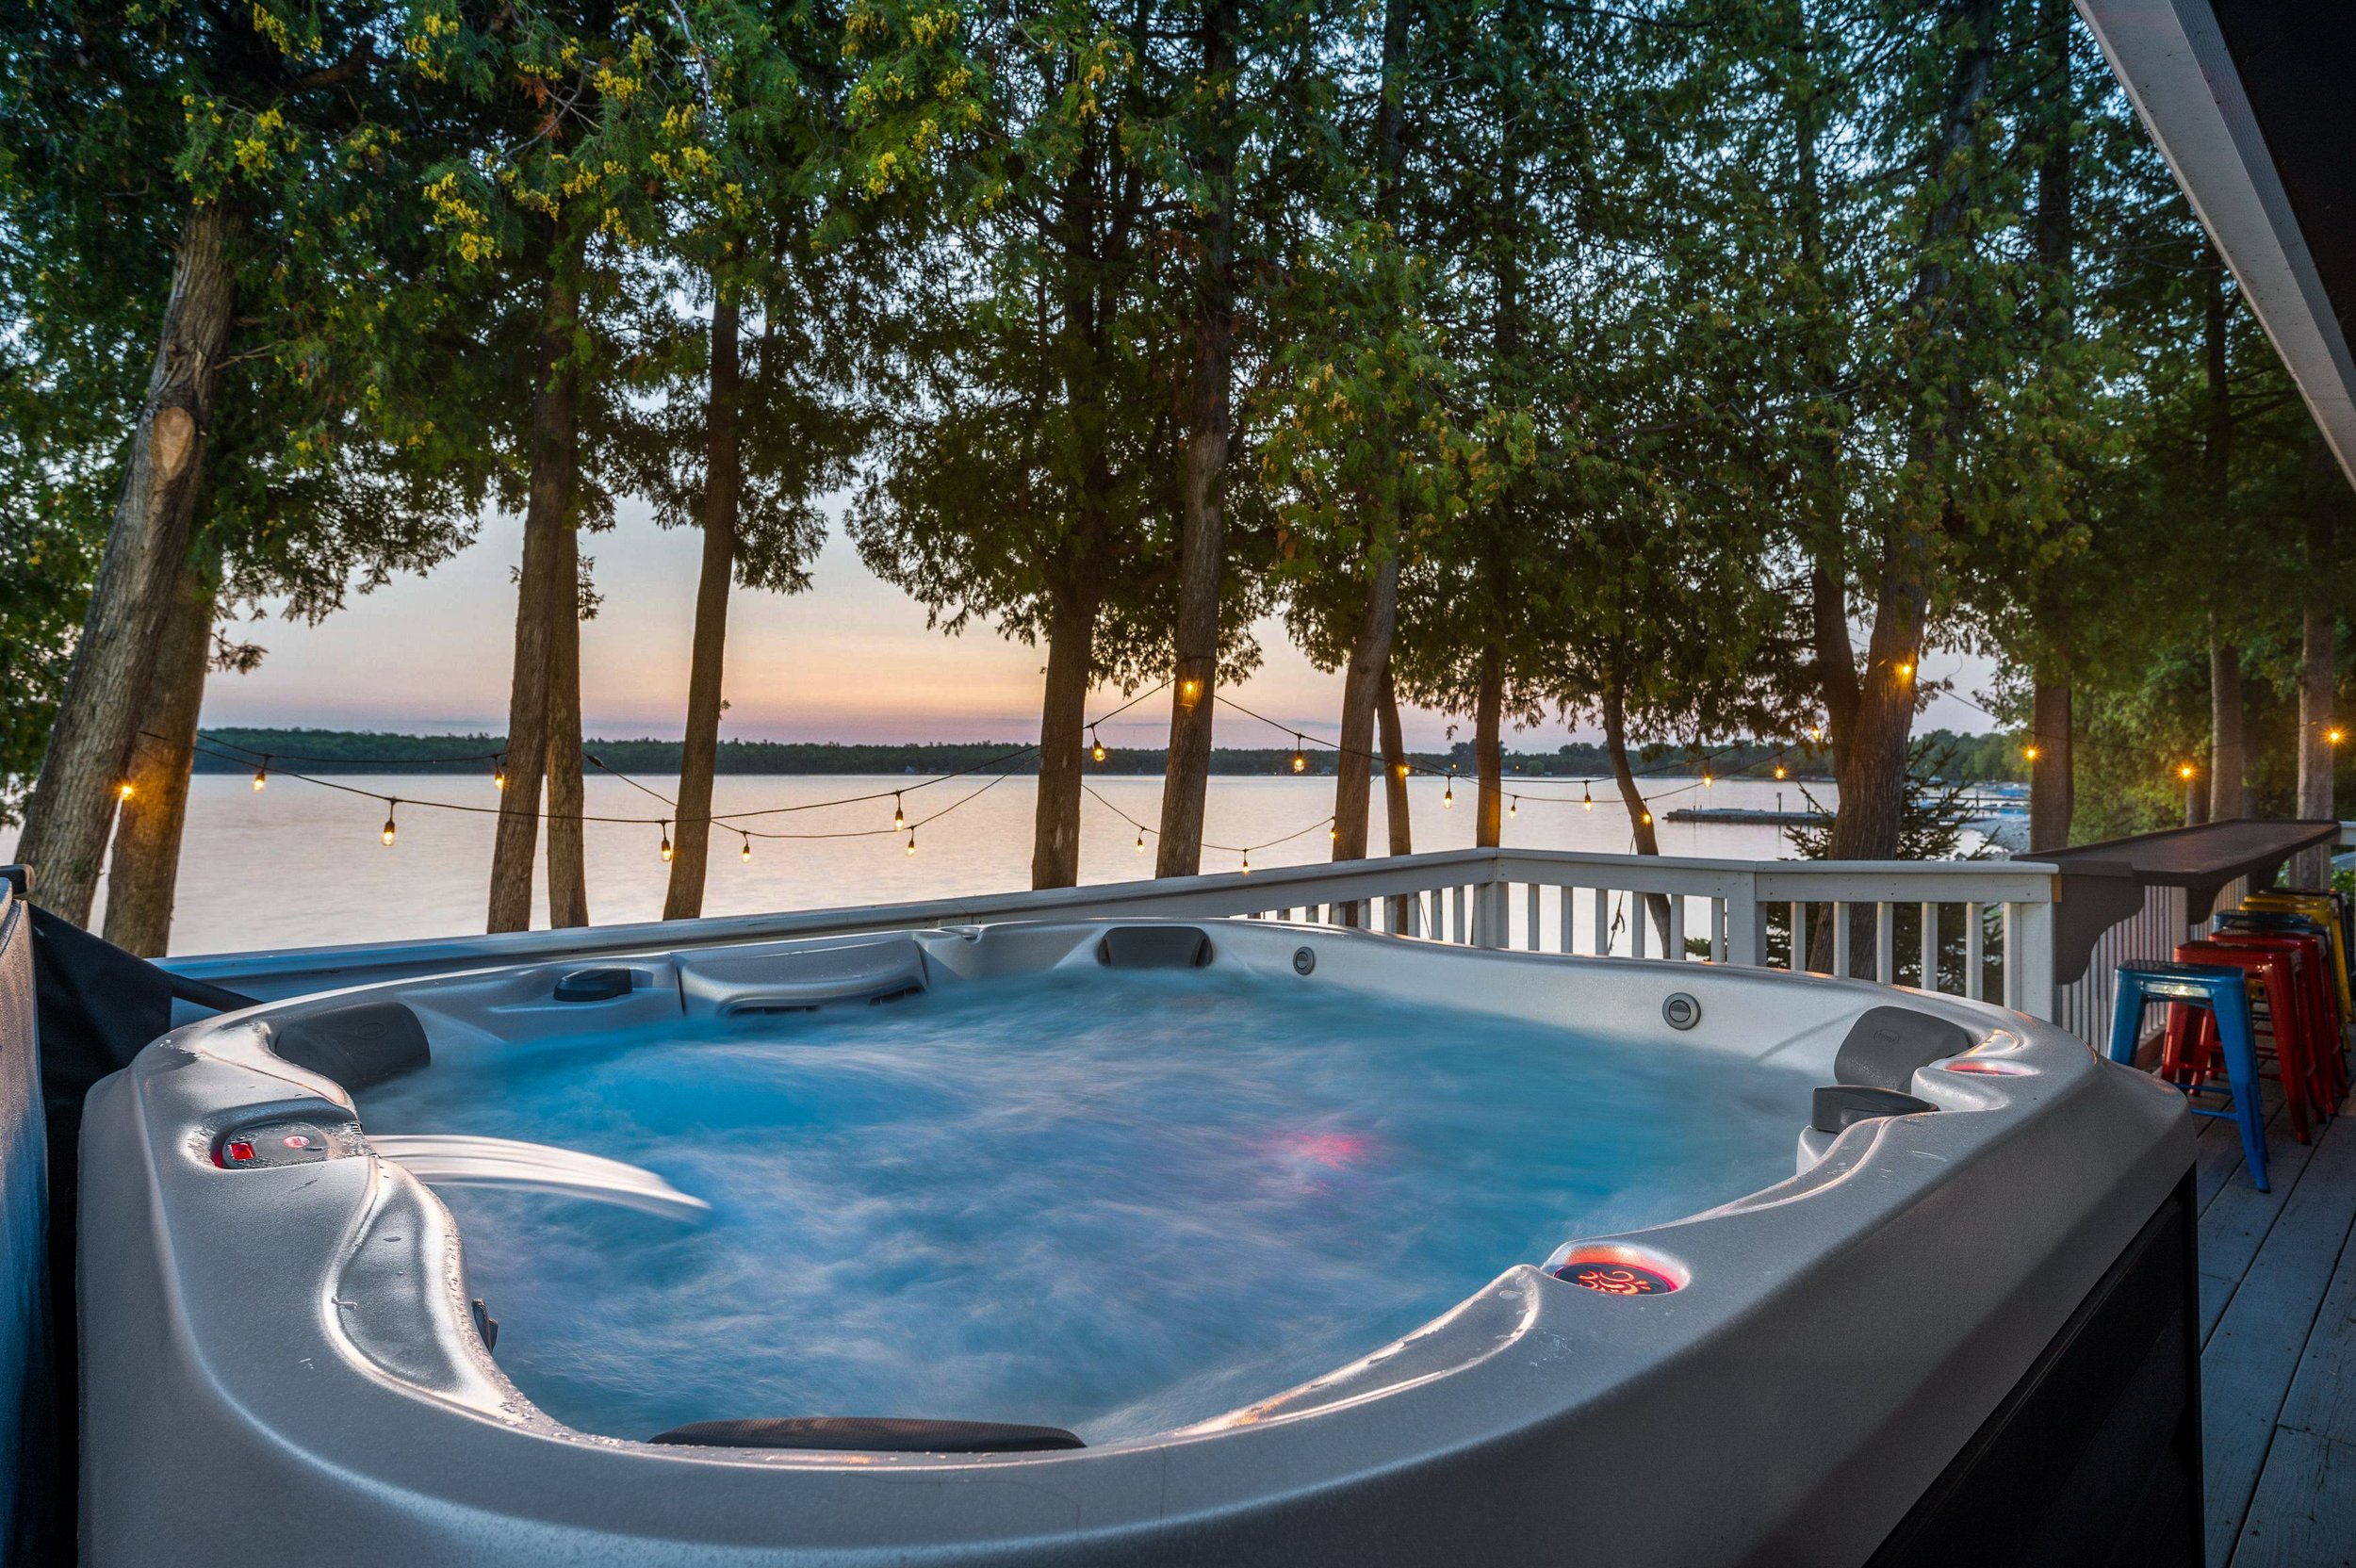 2 - Unwind and relax in the 6 person hot tub overlooking the water. .jpg